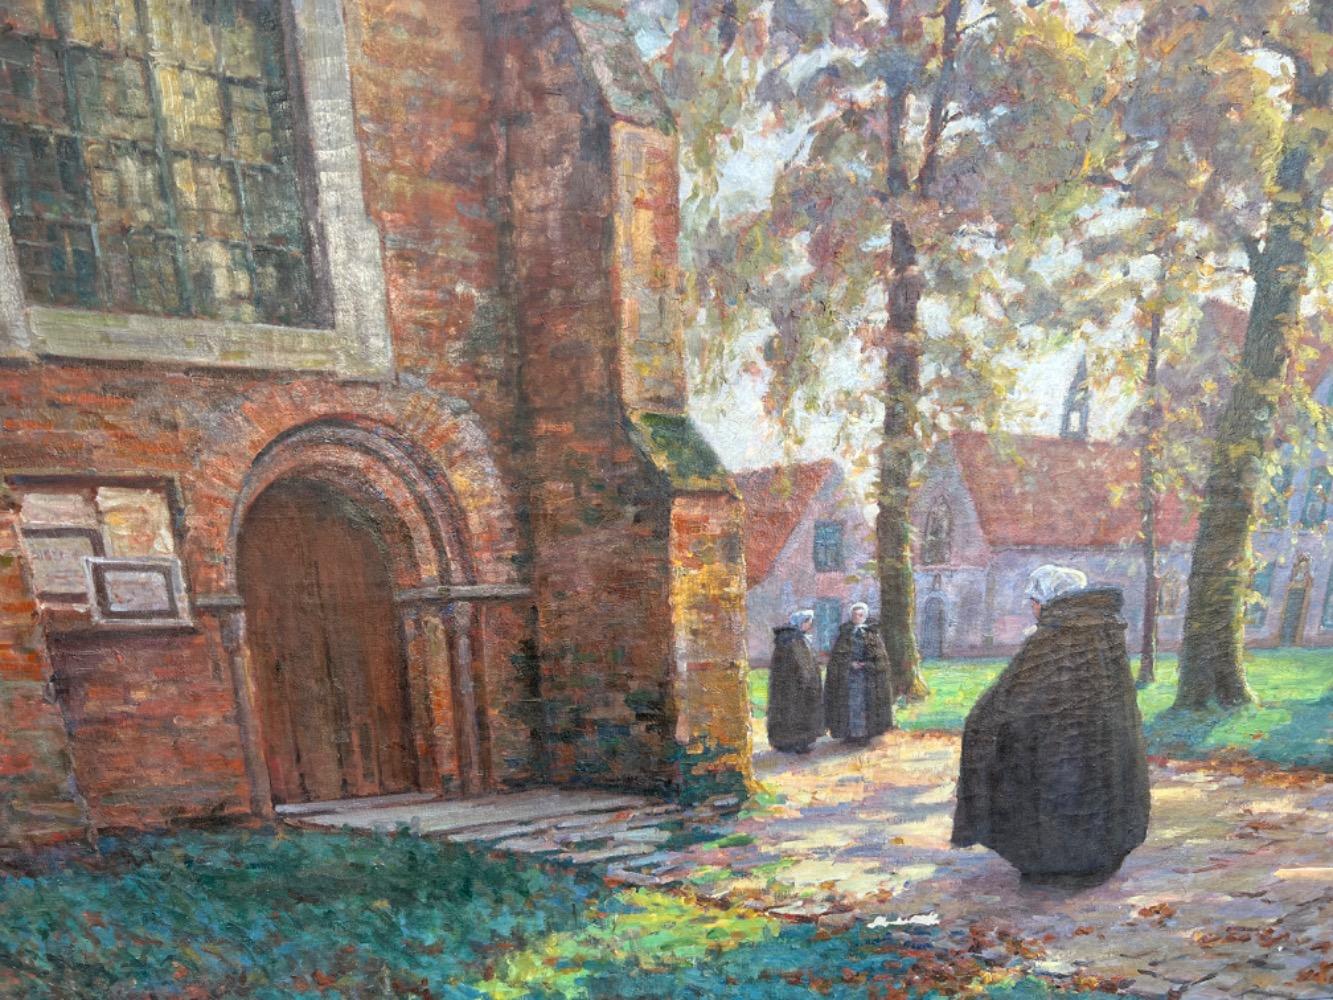 The daily life at the Beguinage of Bruges ( oil on canvas )